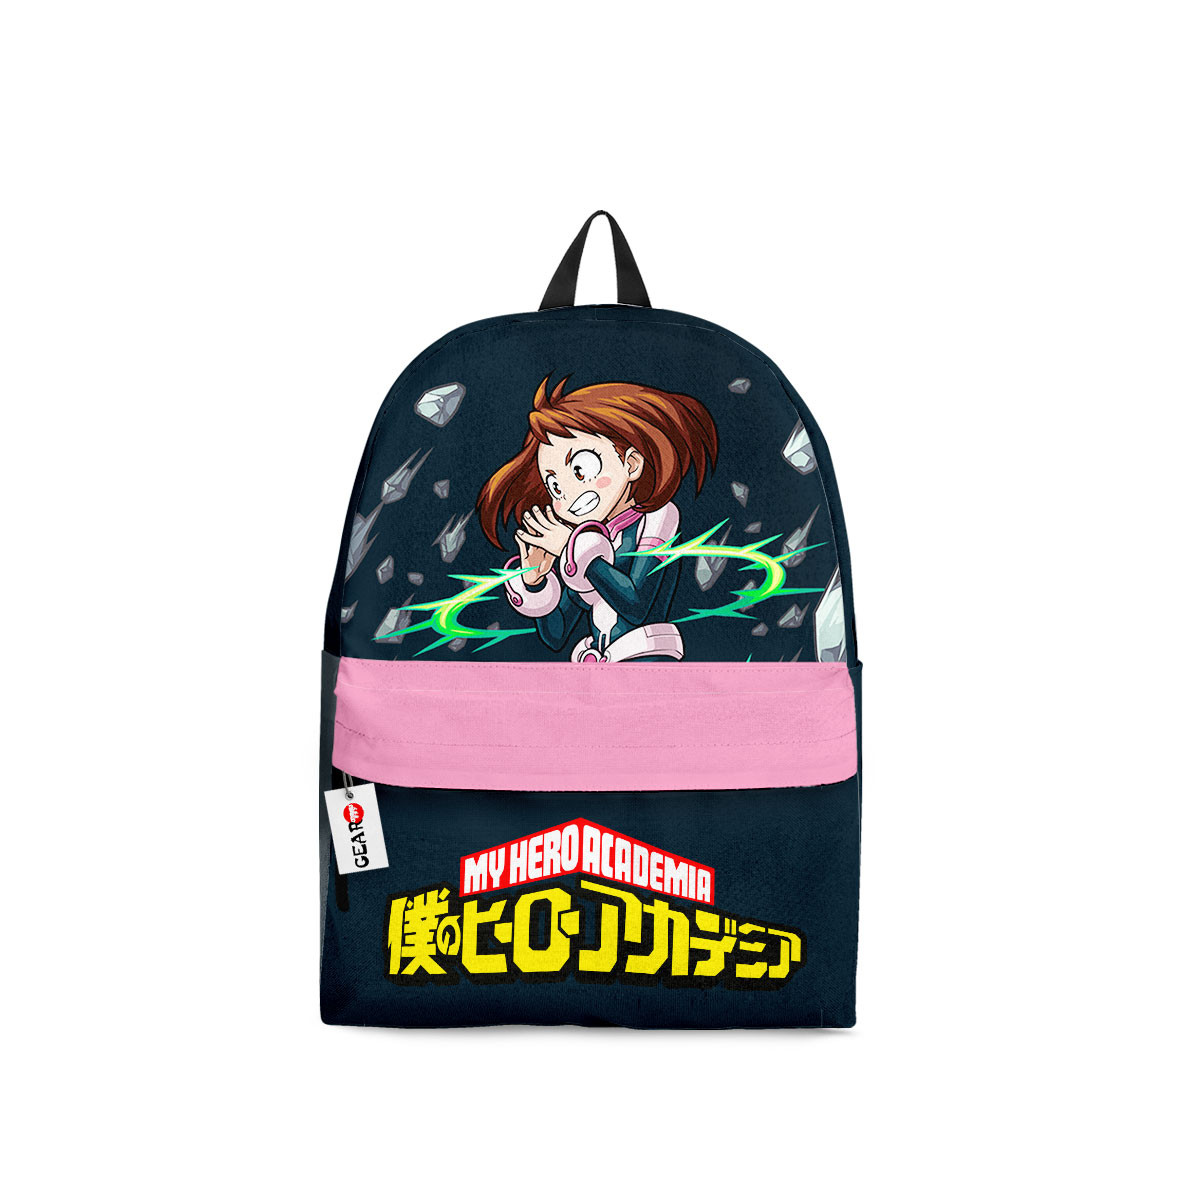 Latest Anime style products 132